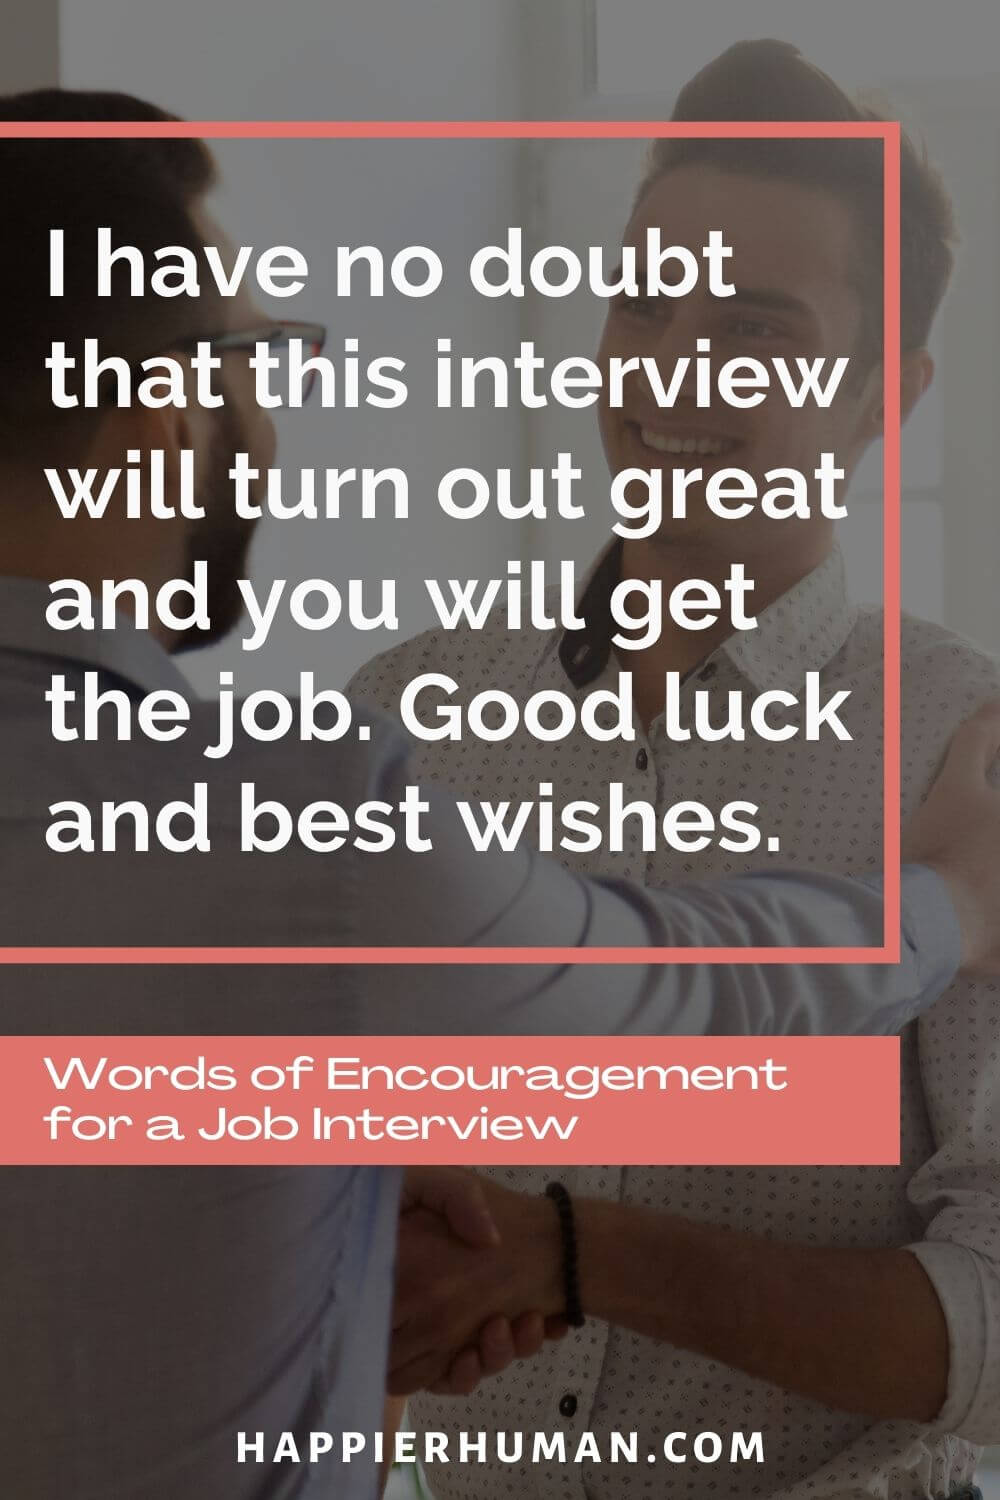 good luck quotes for new job